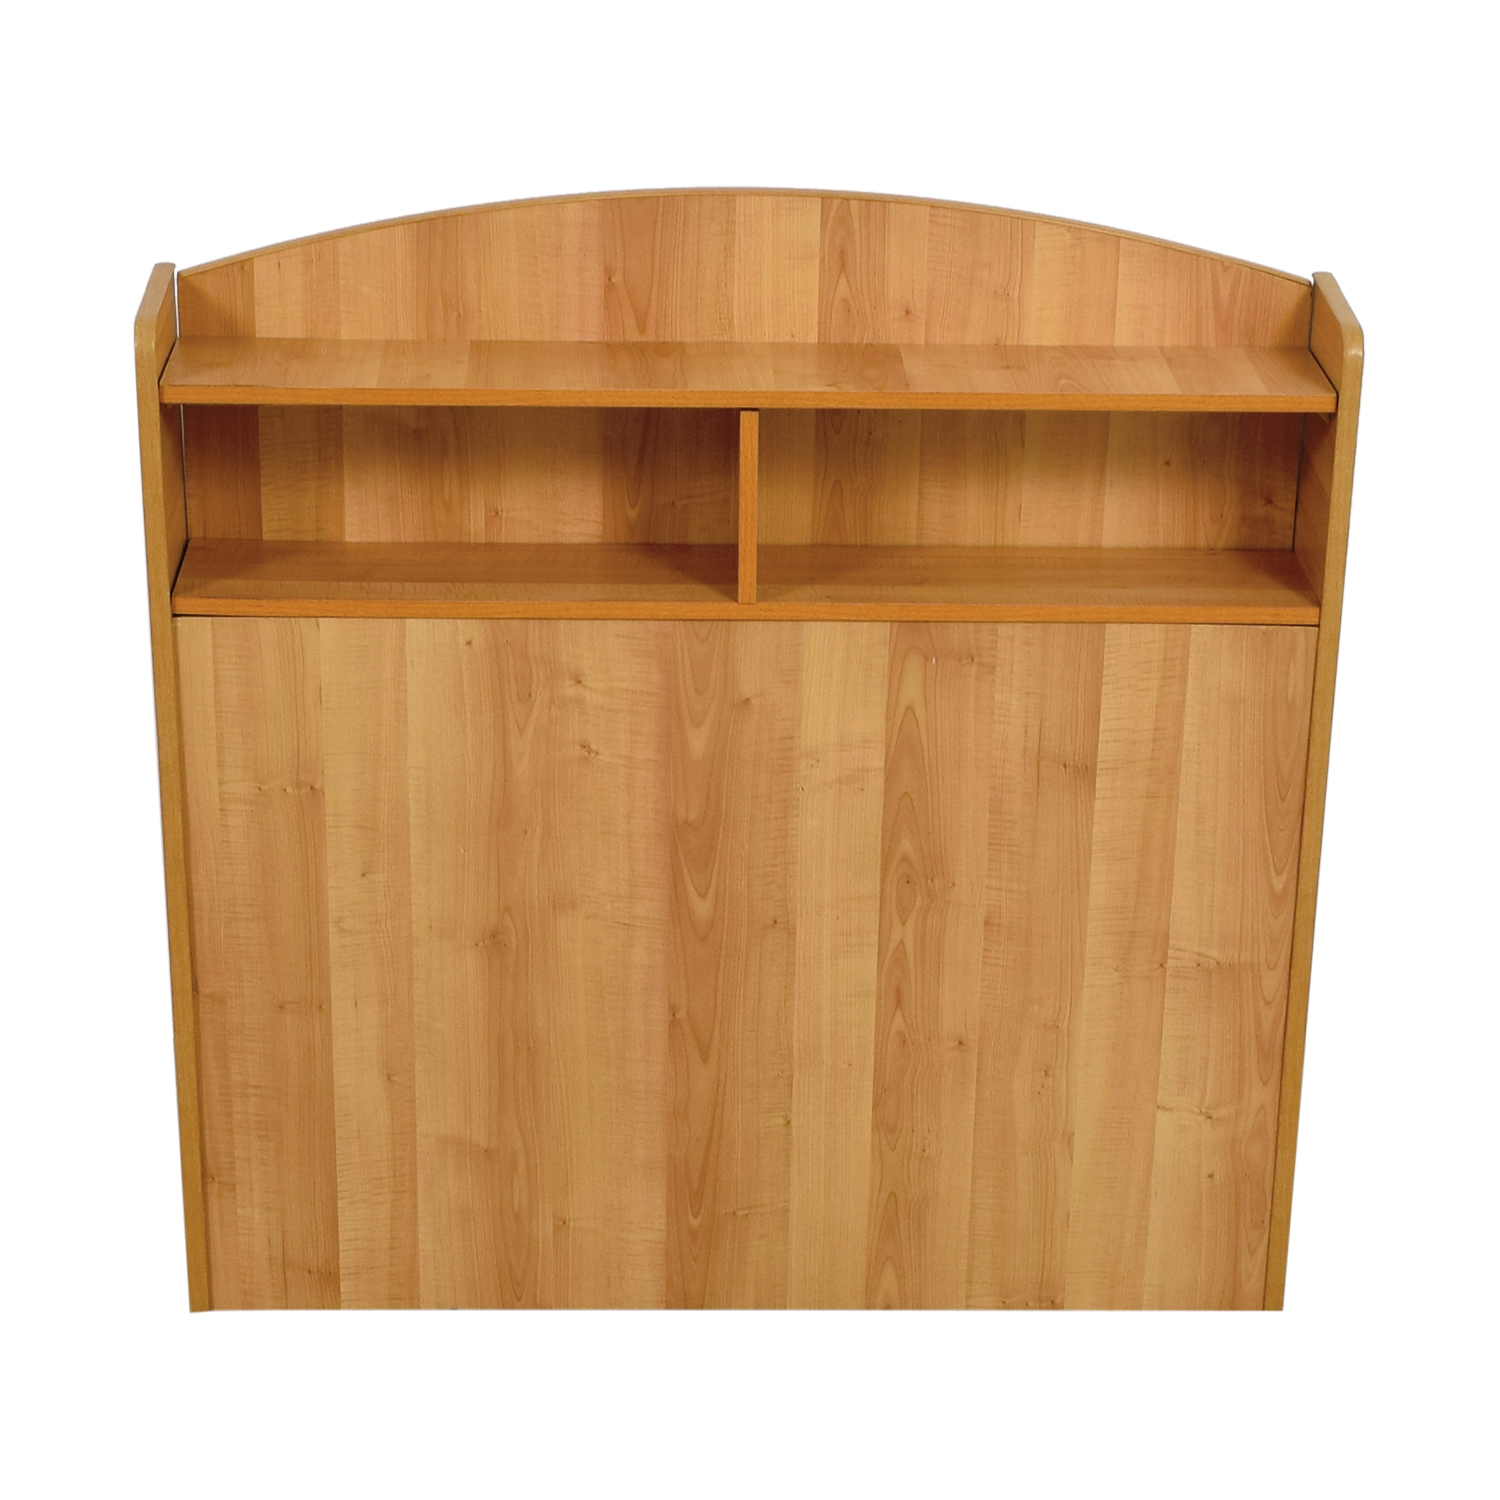 83% OFF - Captain Pine Wood Twin Headboard with Shelves / Beds